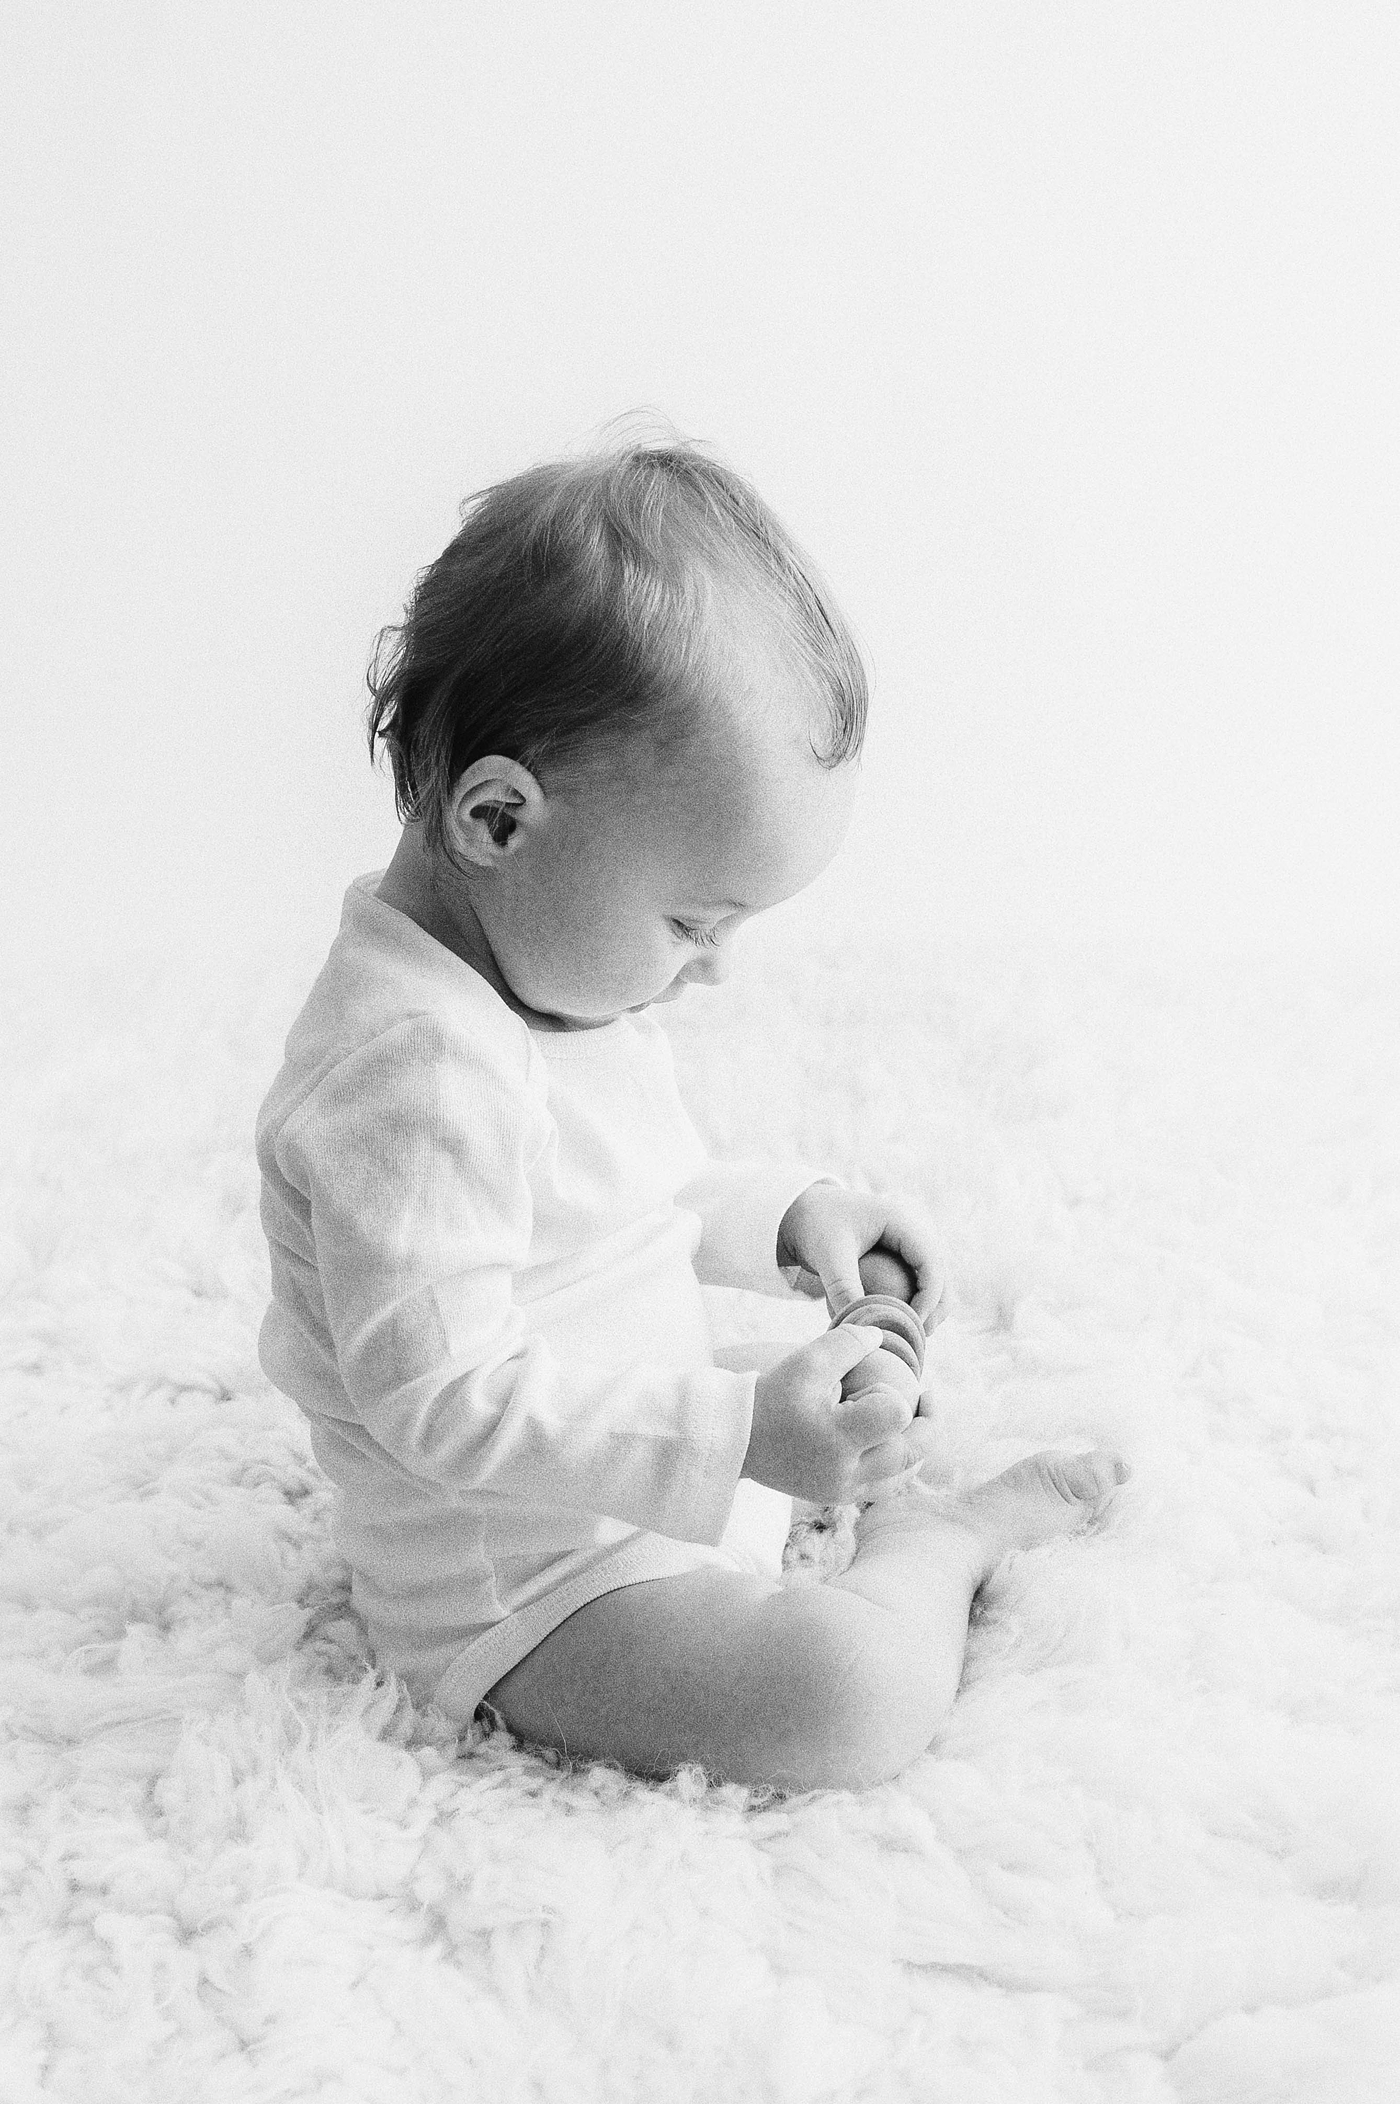 Baby boy studies wooden toy during one year old milestone session. Photo by Meg Newton Photography.